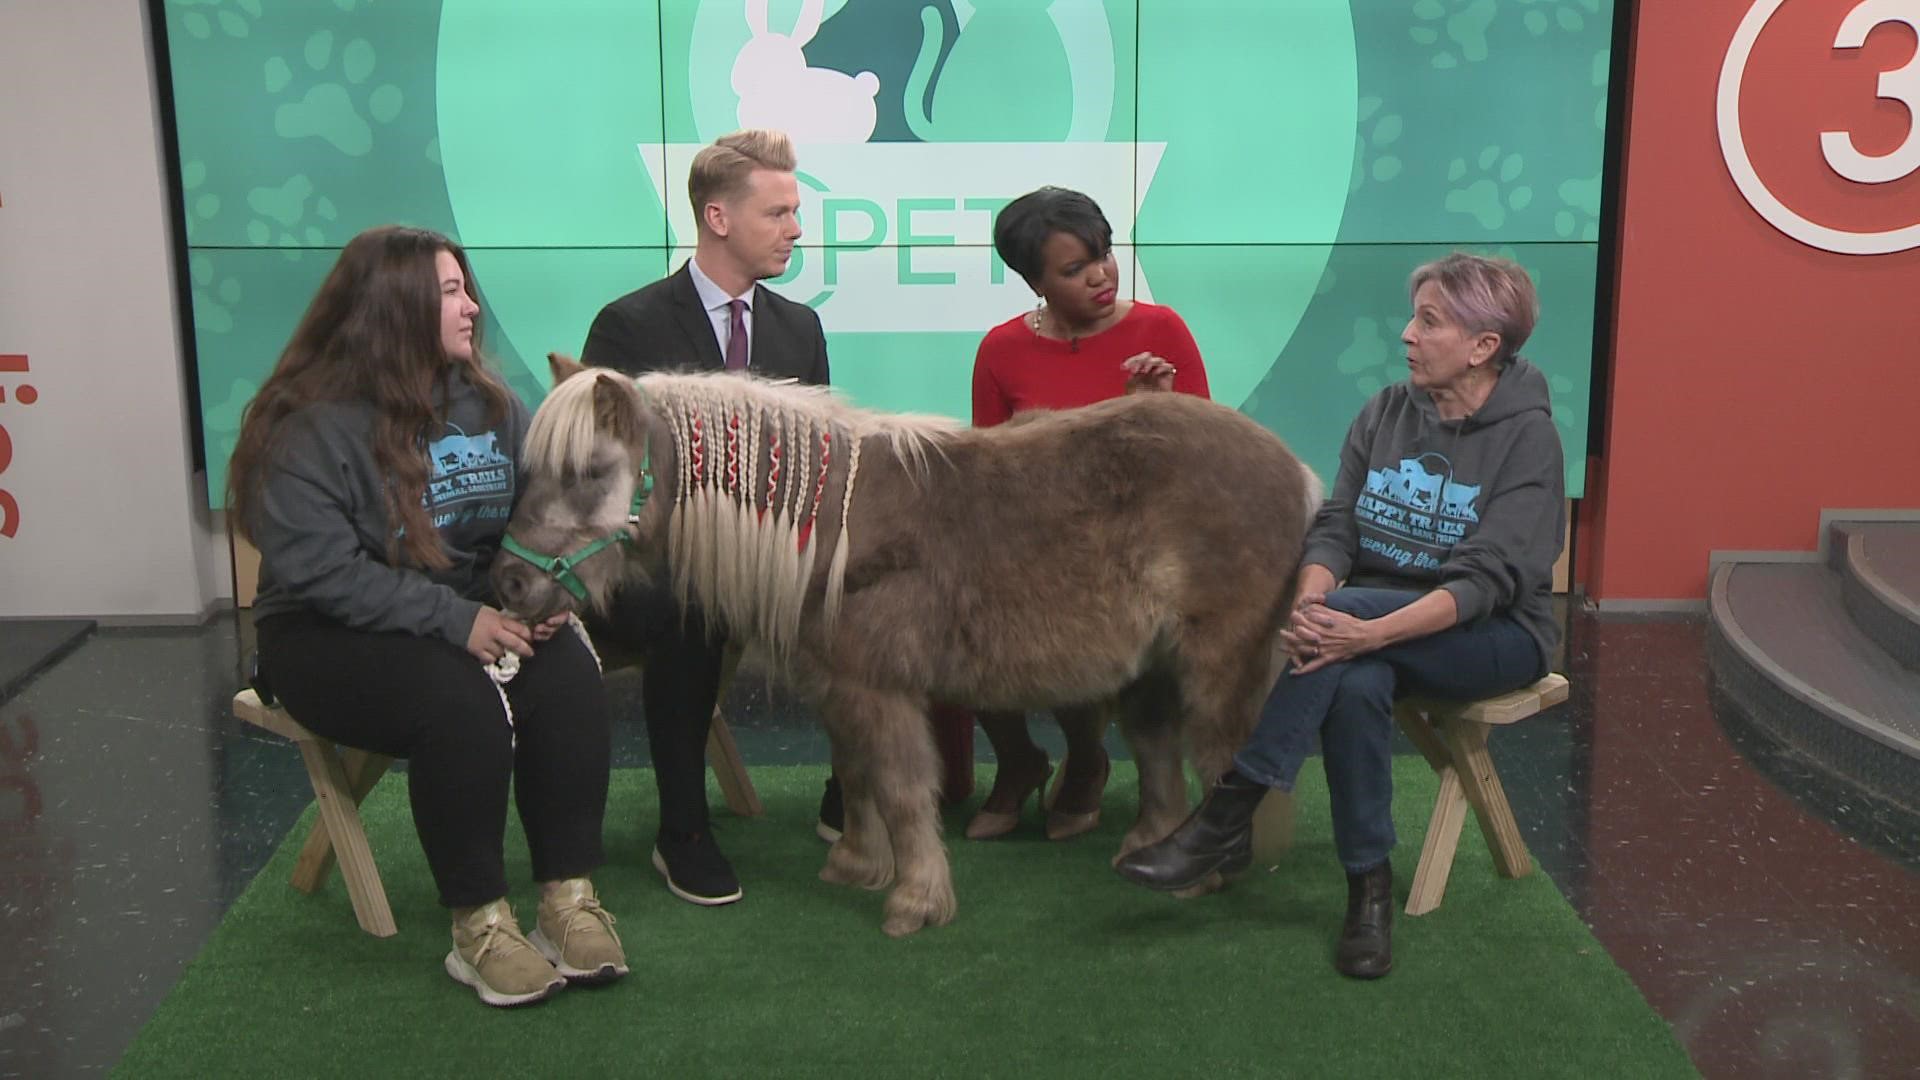 Ready Pet Go! Mouse the horse from Happy Trails Farm Animal Sanctuary  visits 3News 